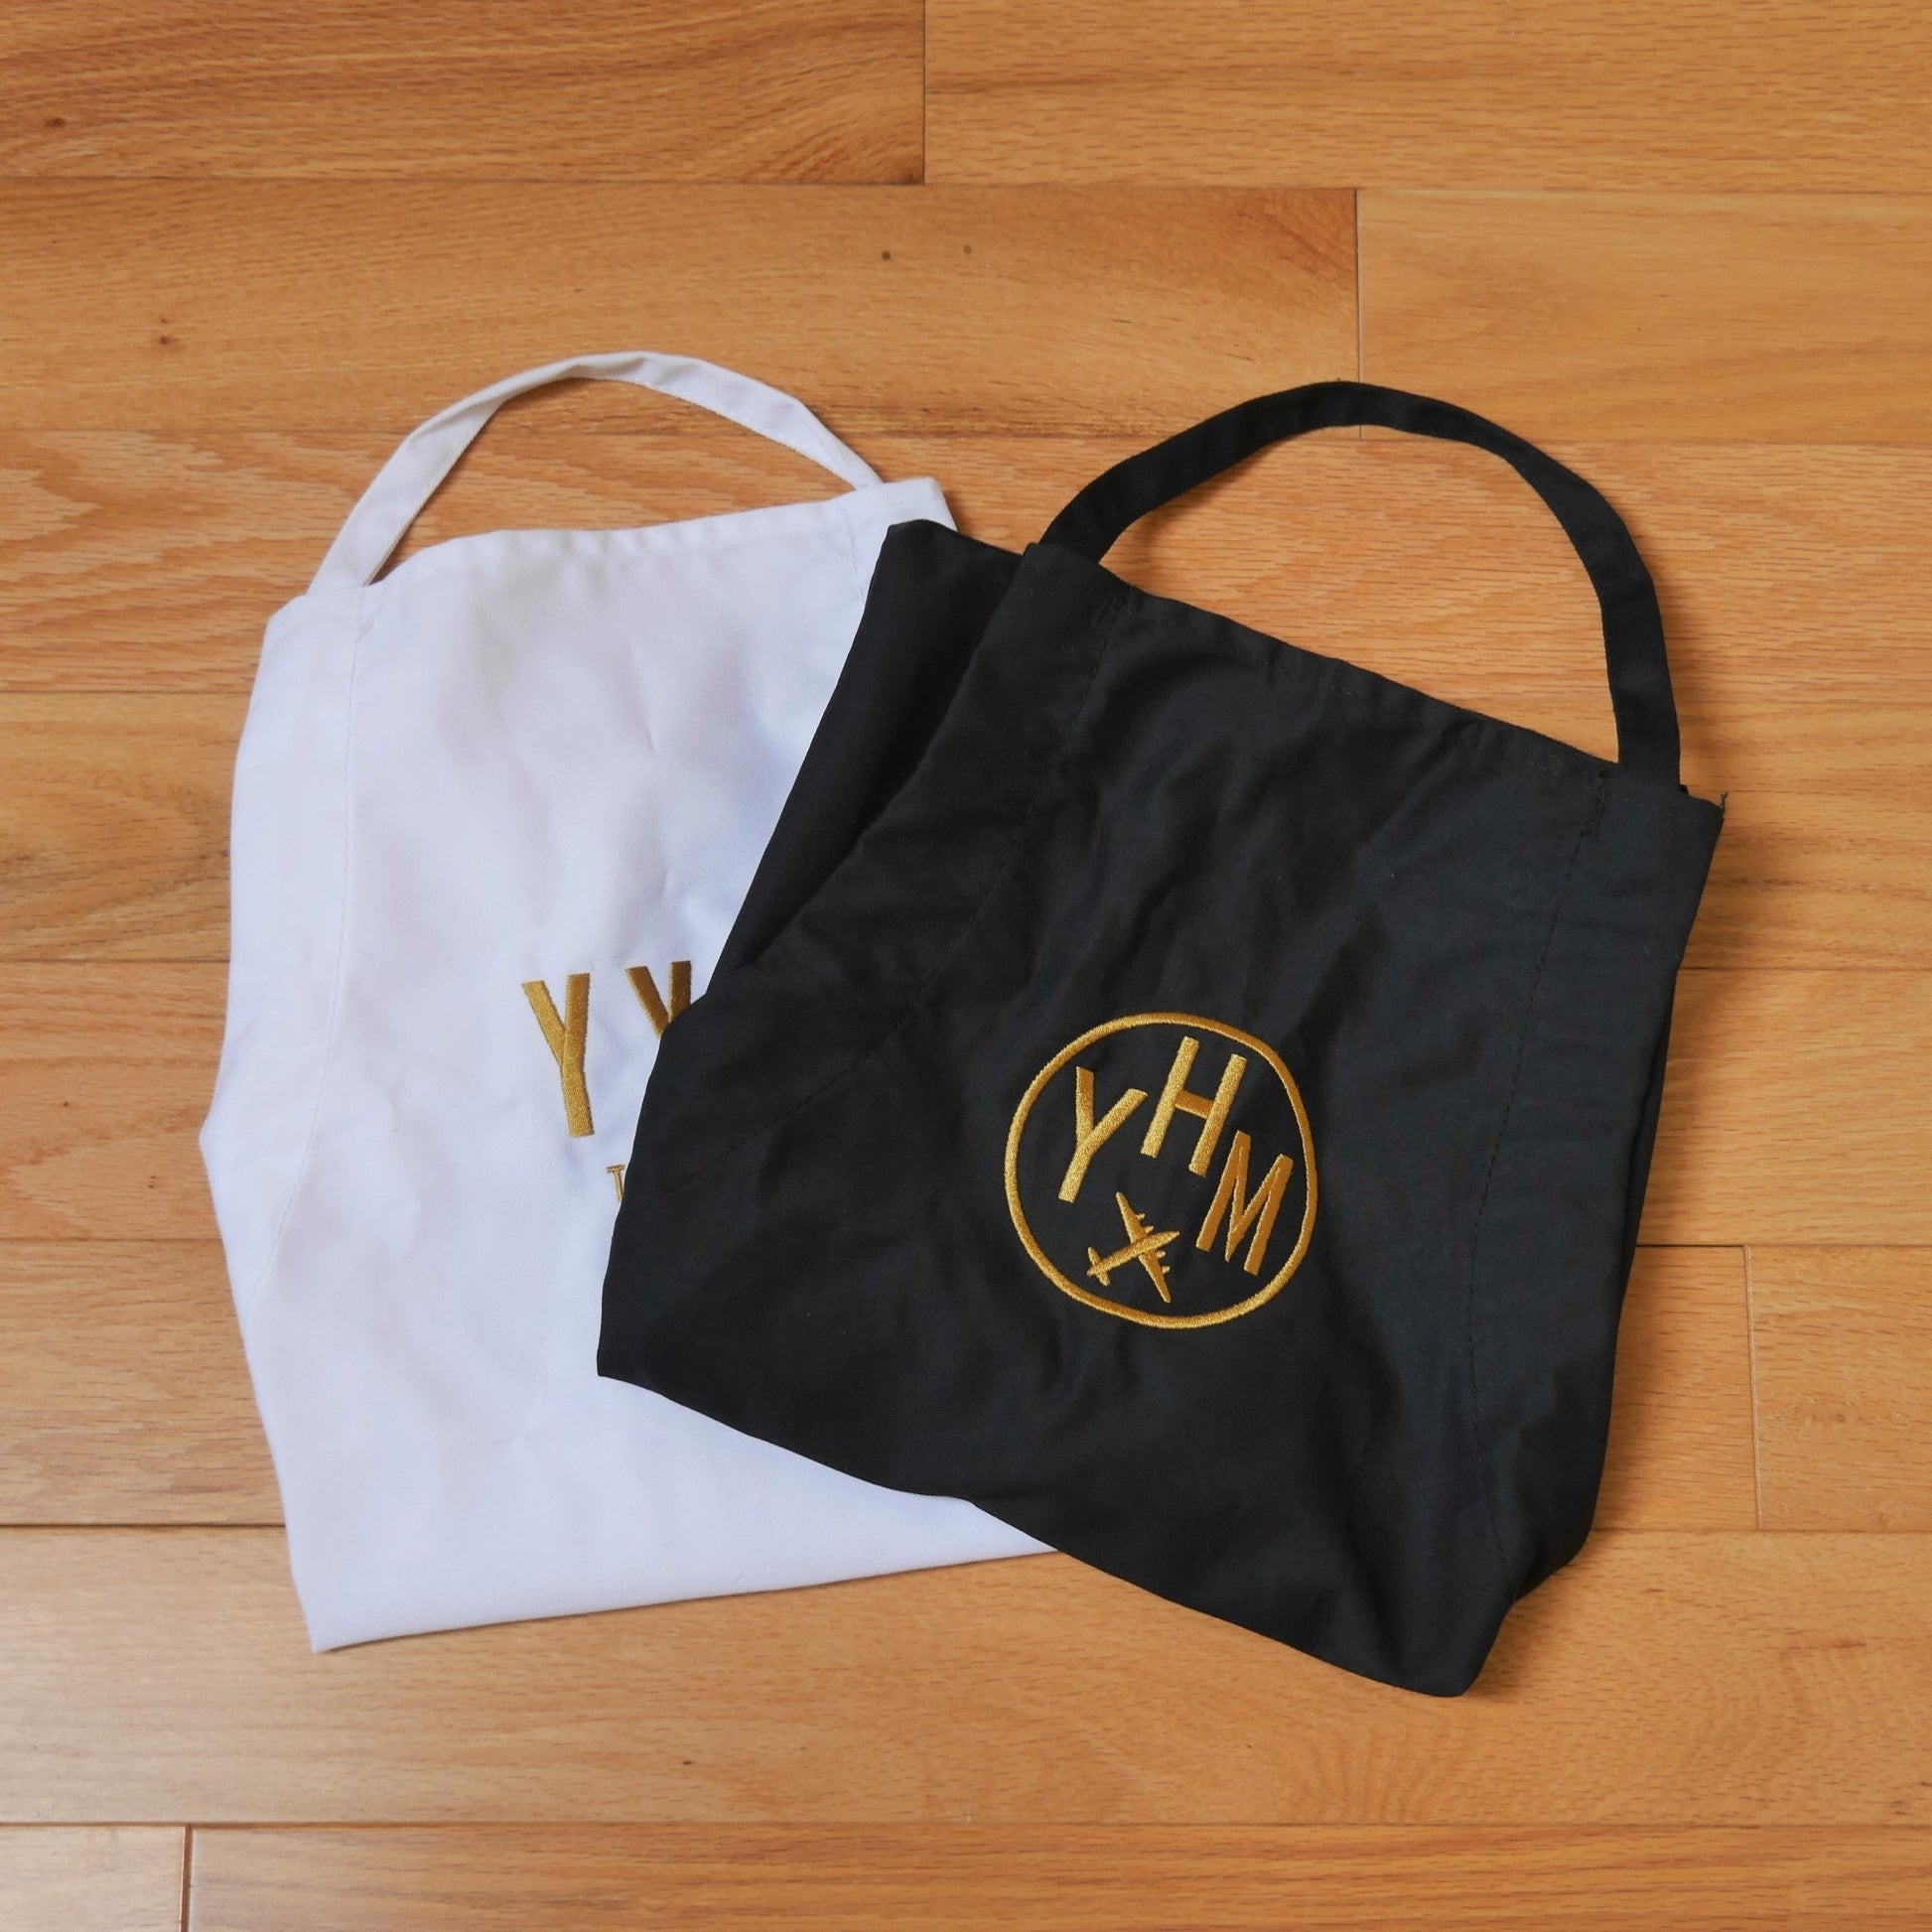 City Embroidered Apron - Old Gold • ATL Atlanta • YHM Designs - Image 14